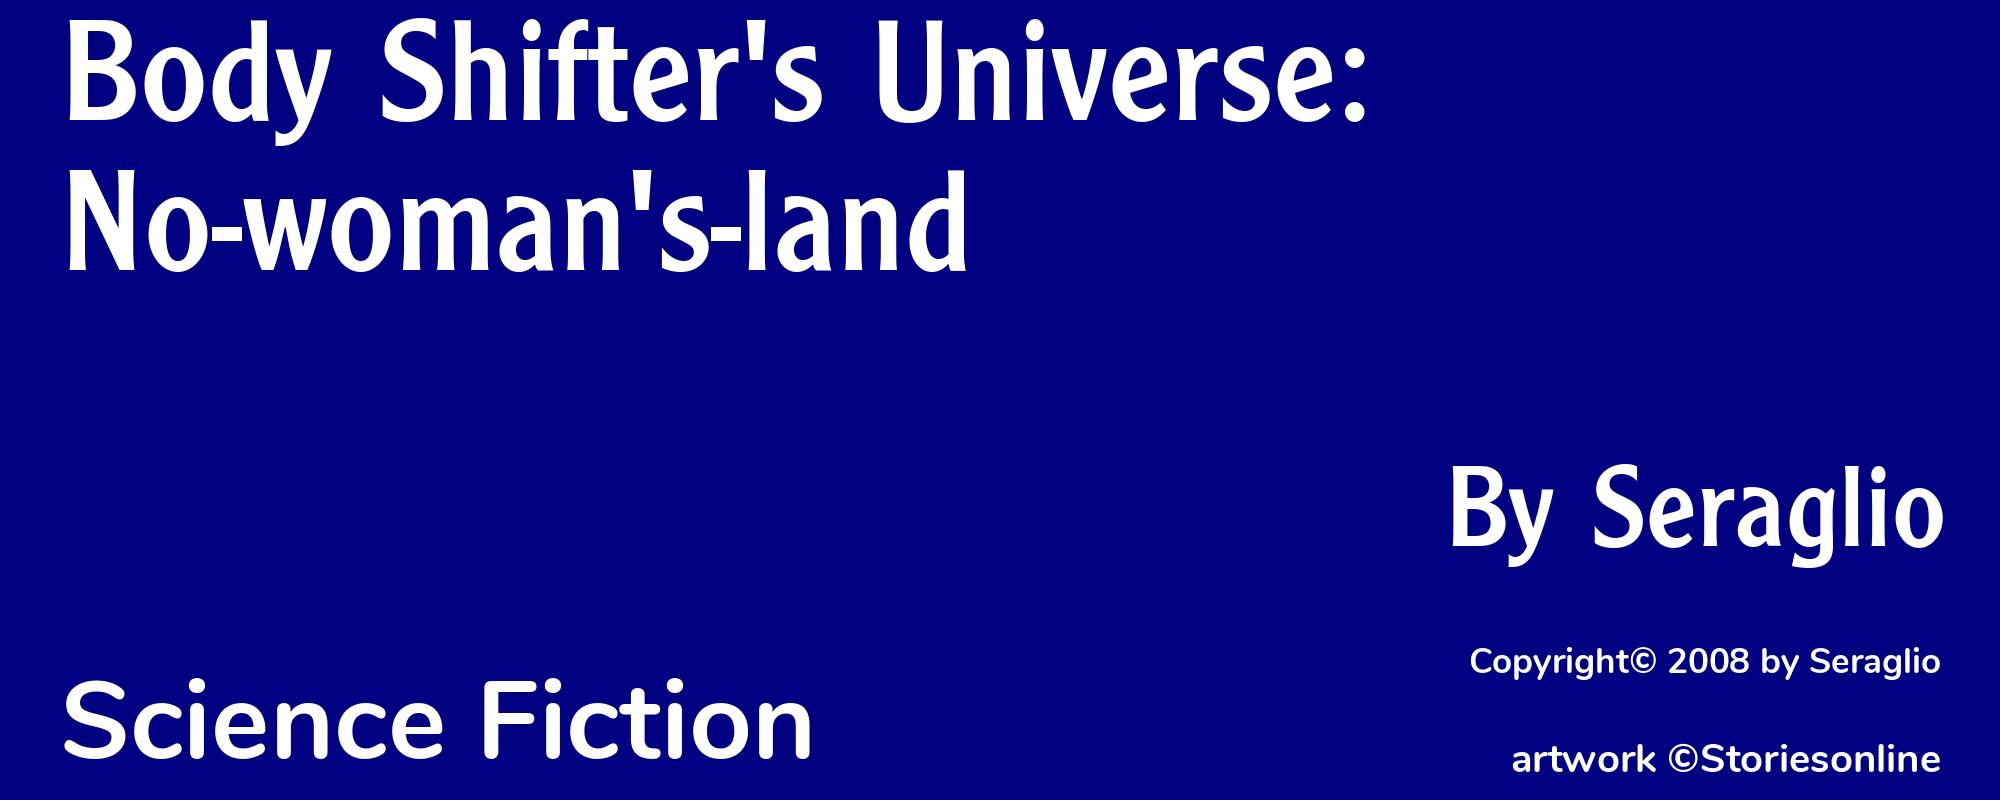 Body Shifter's Universe: No-woman's-land - Cover